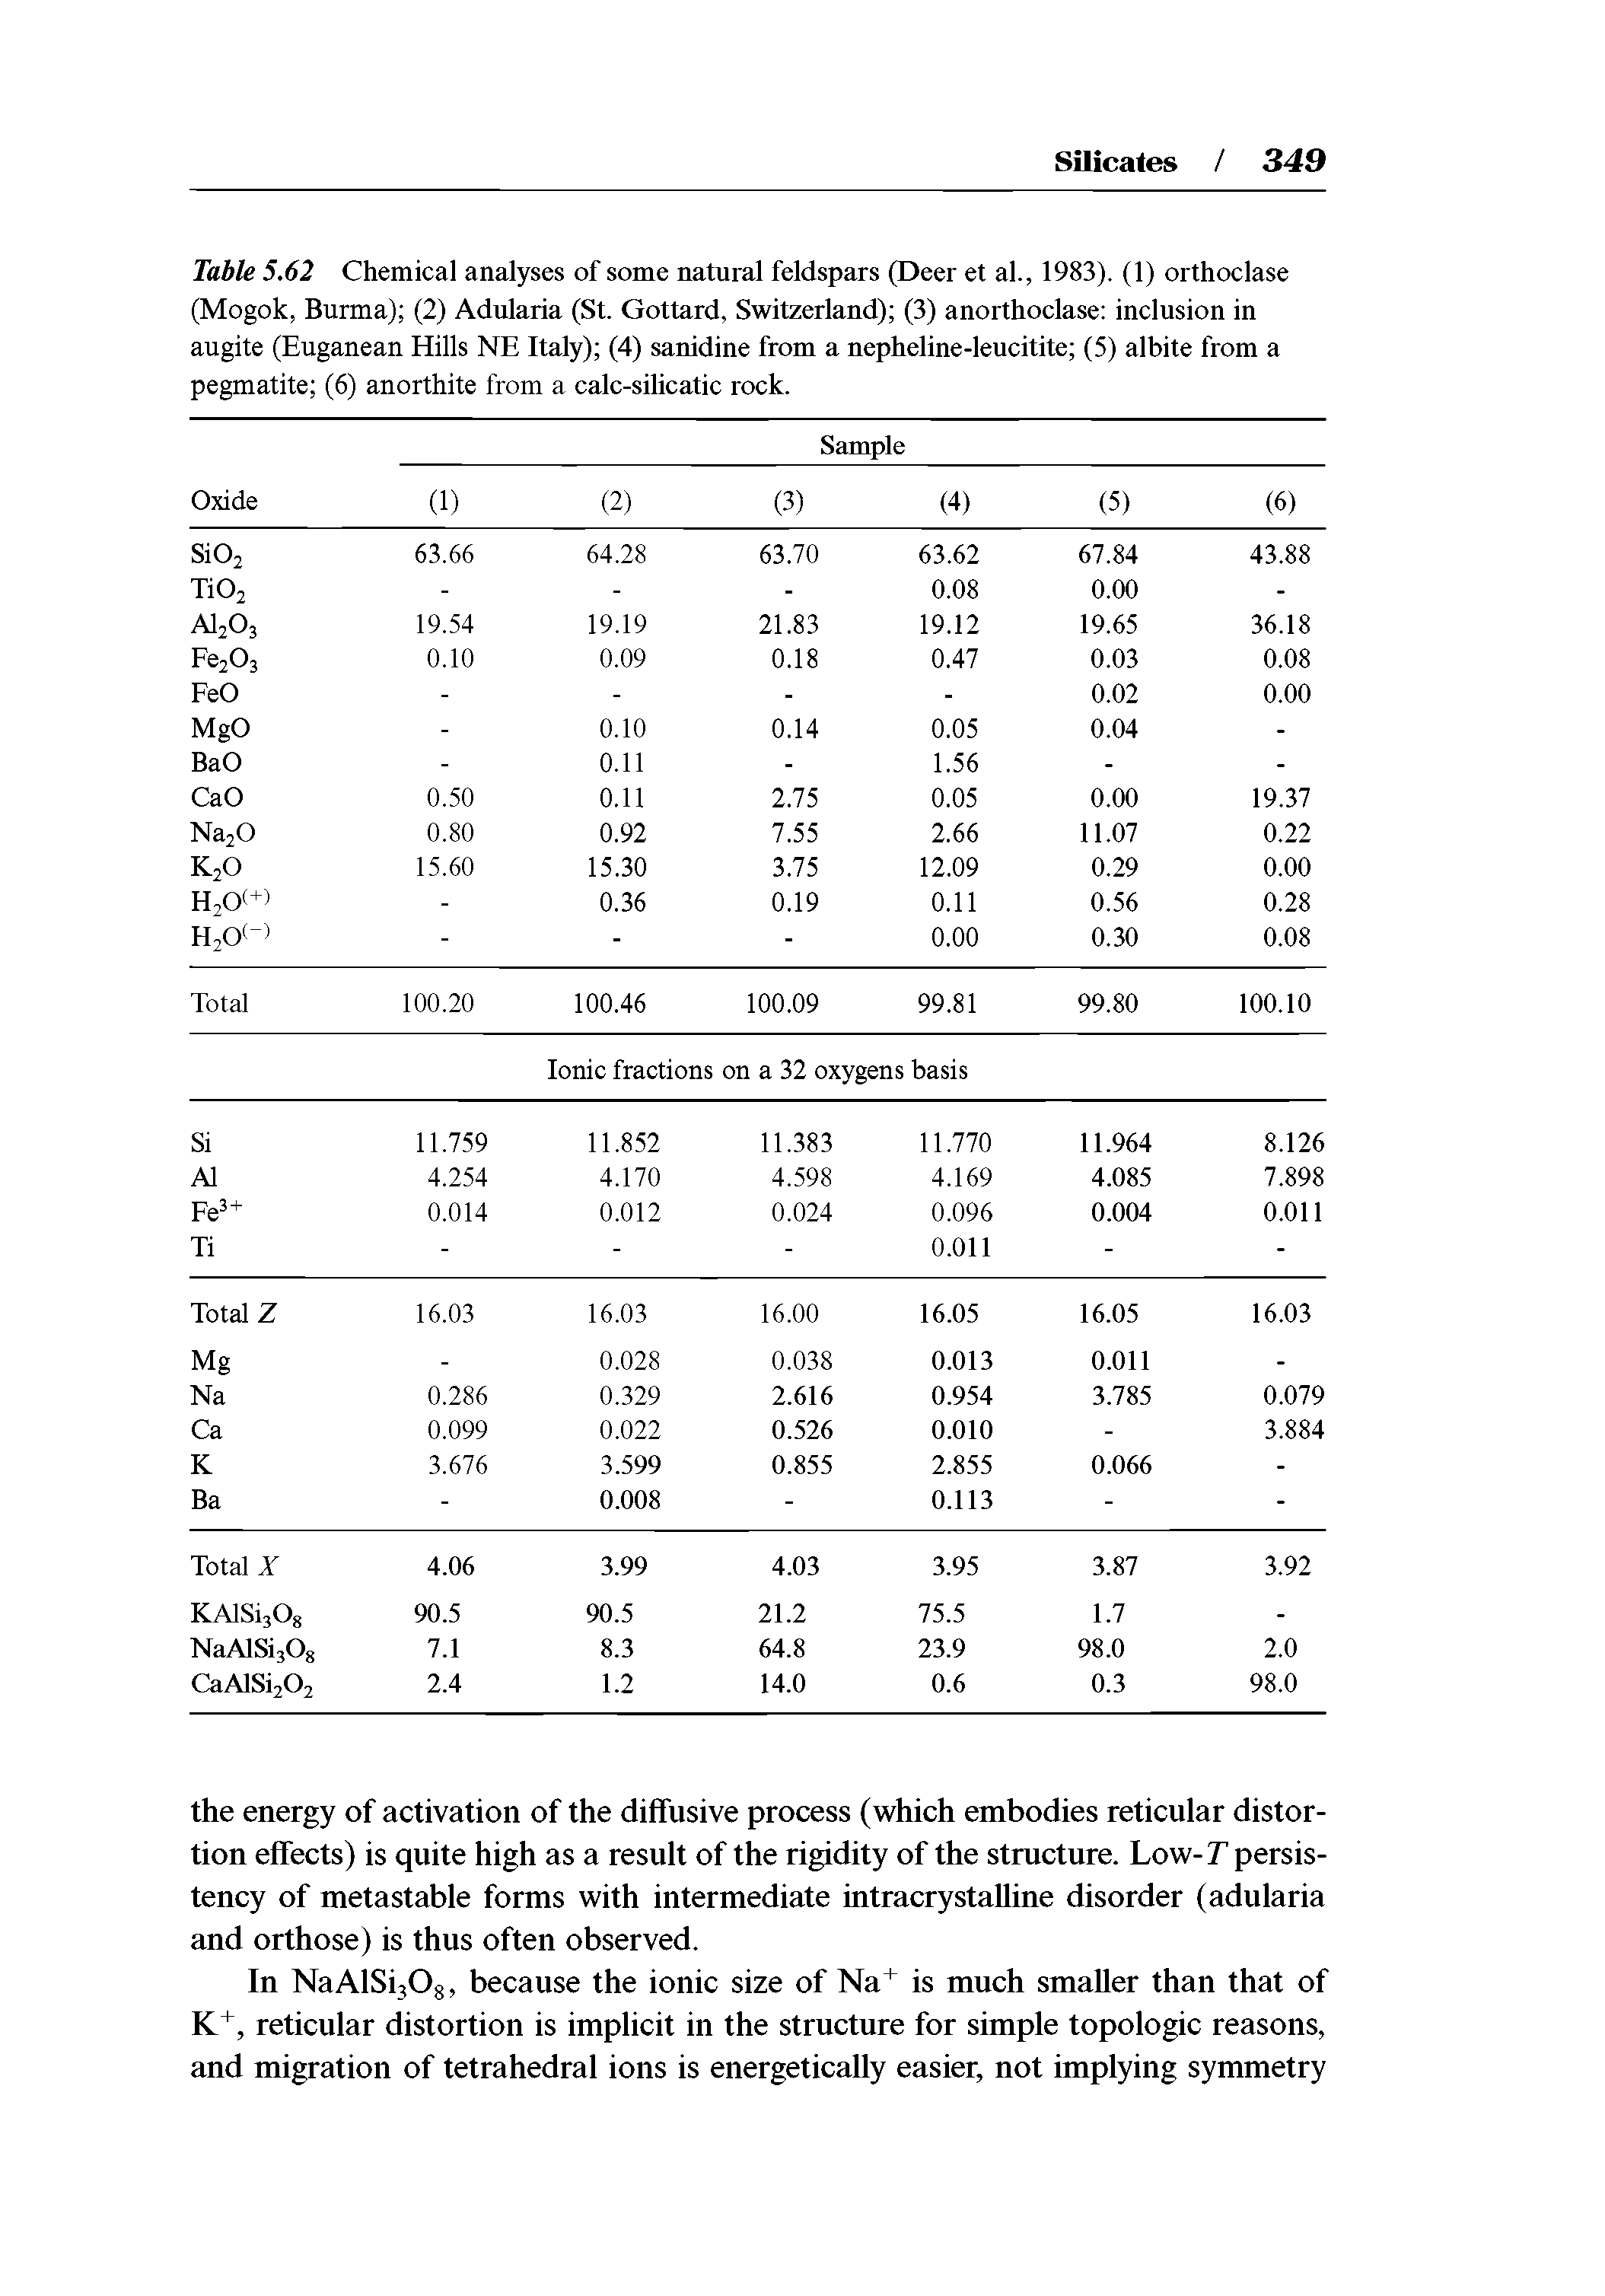 Table 5.62 Chemical analyses of some natural feldspars (Deer et al., 1983). (1) orthoclase (Mogok, Burma) (2) Adularia (St. Gottard, Switzerland) (3) anorthoclase inclusion in augite (Euganean Hills NE Italy) (4) sanidine from a nepheline-leucitite (5) albite from a pegmatite (6) anorthite from a calc-silicatic rock. ...